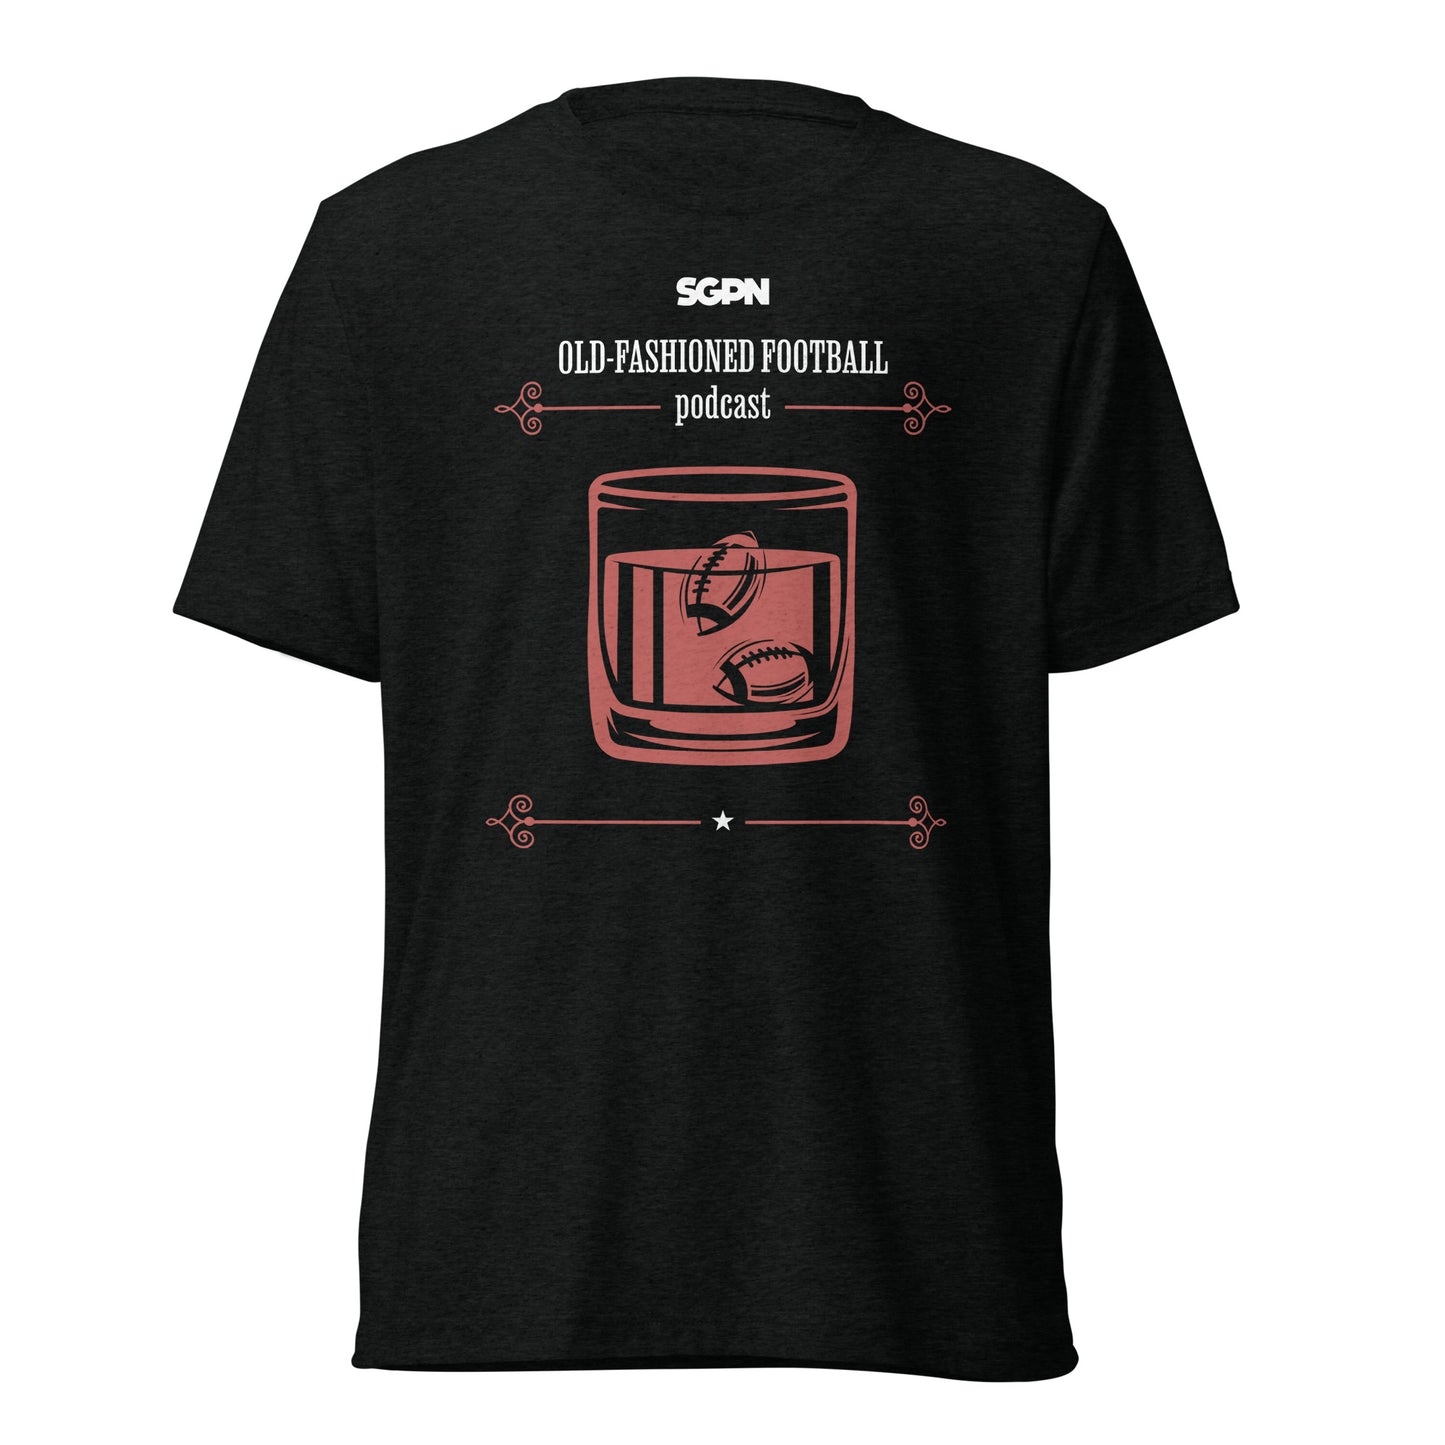 Old-Fashioned Football Podcast - SGPN Fantasy Football (White/Red) - Short sleeve t-shirt